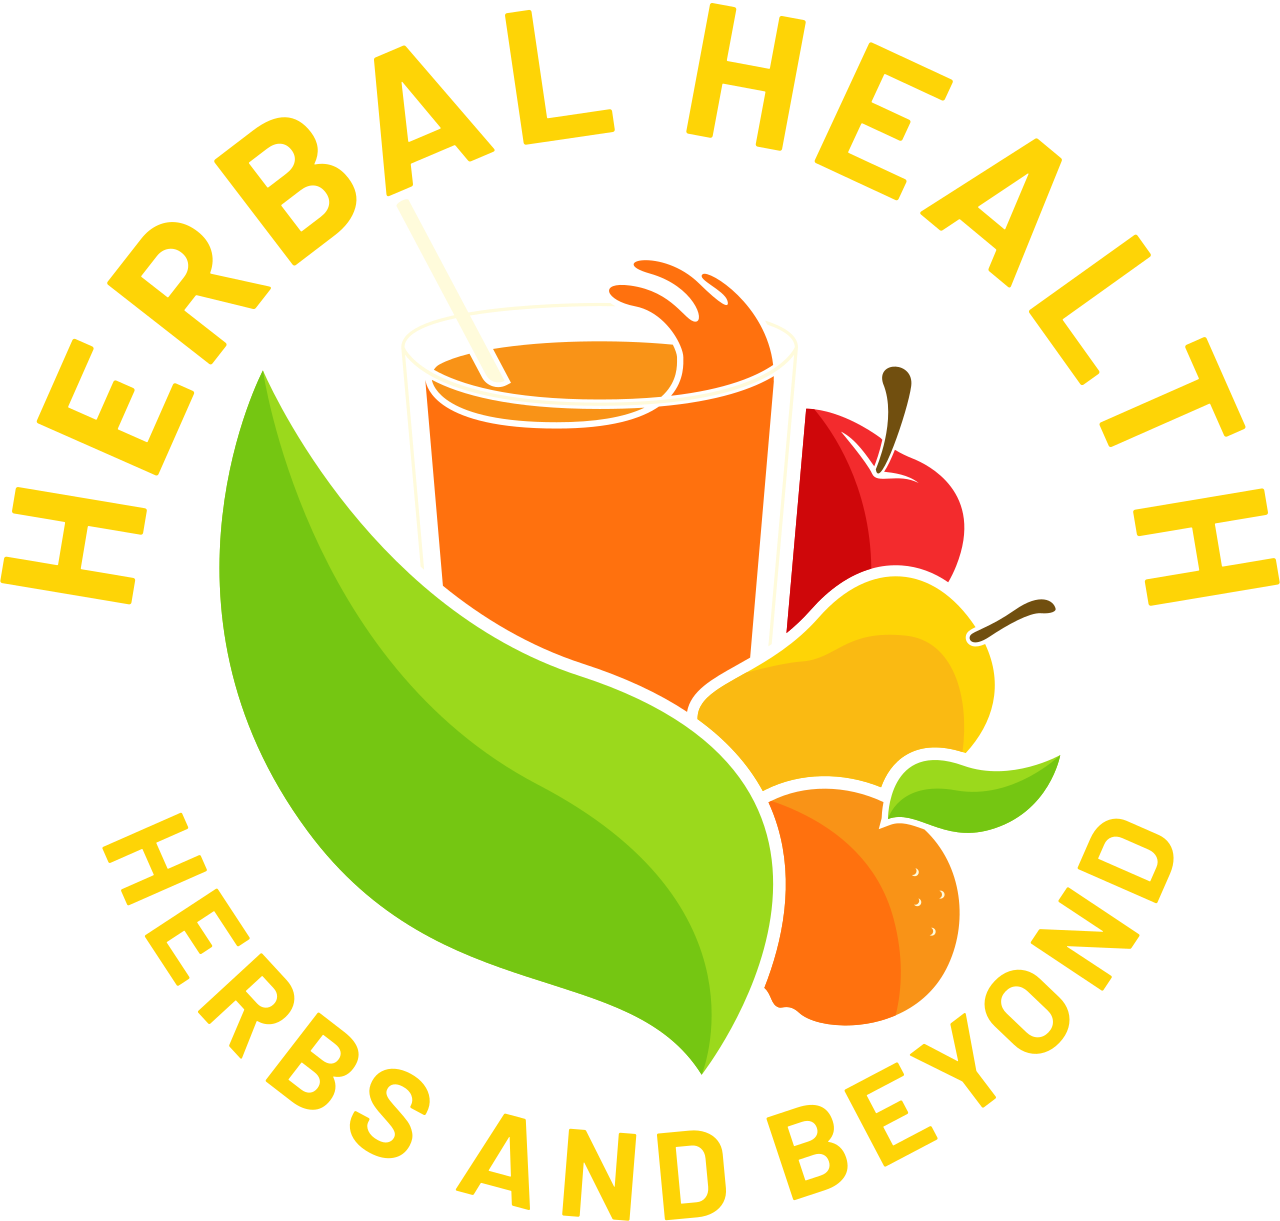 HERBAL HEALTH's web page